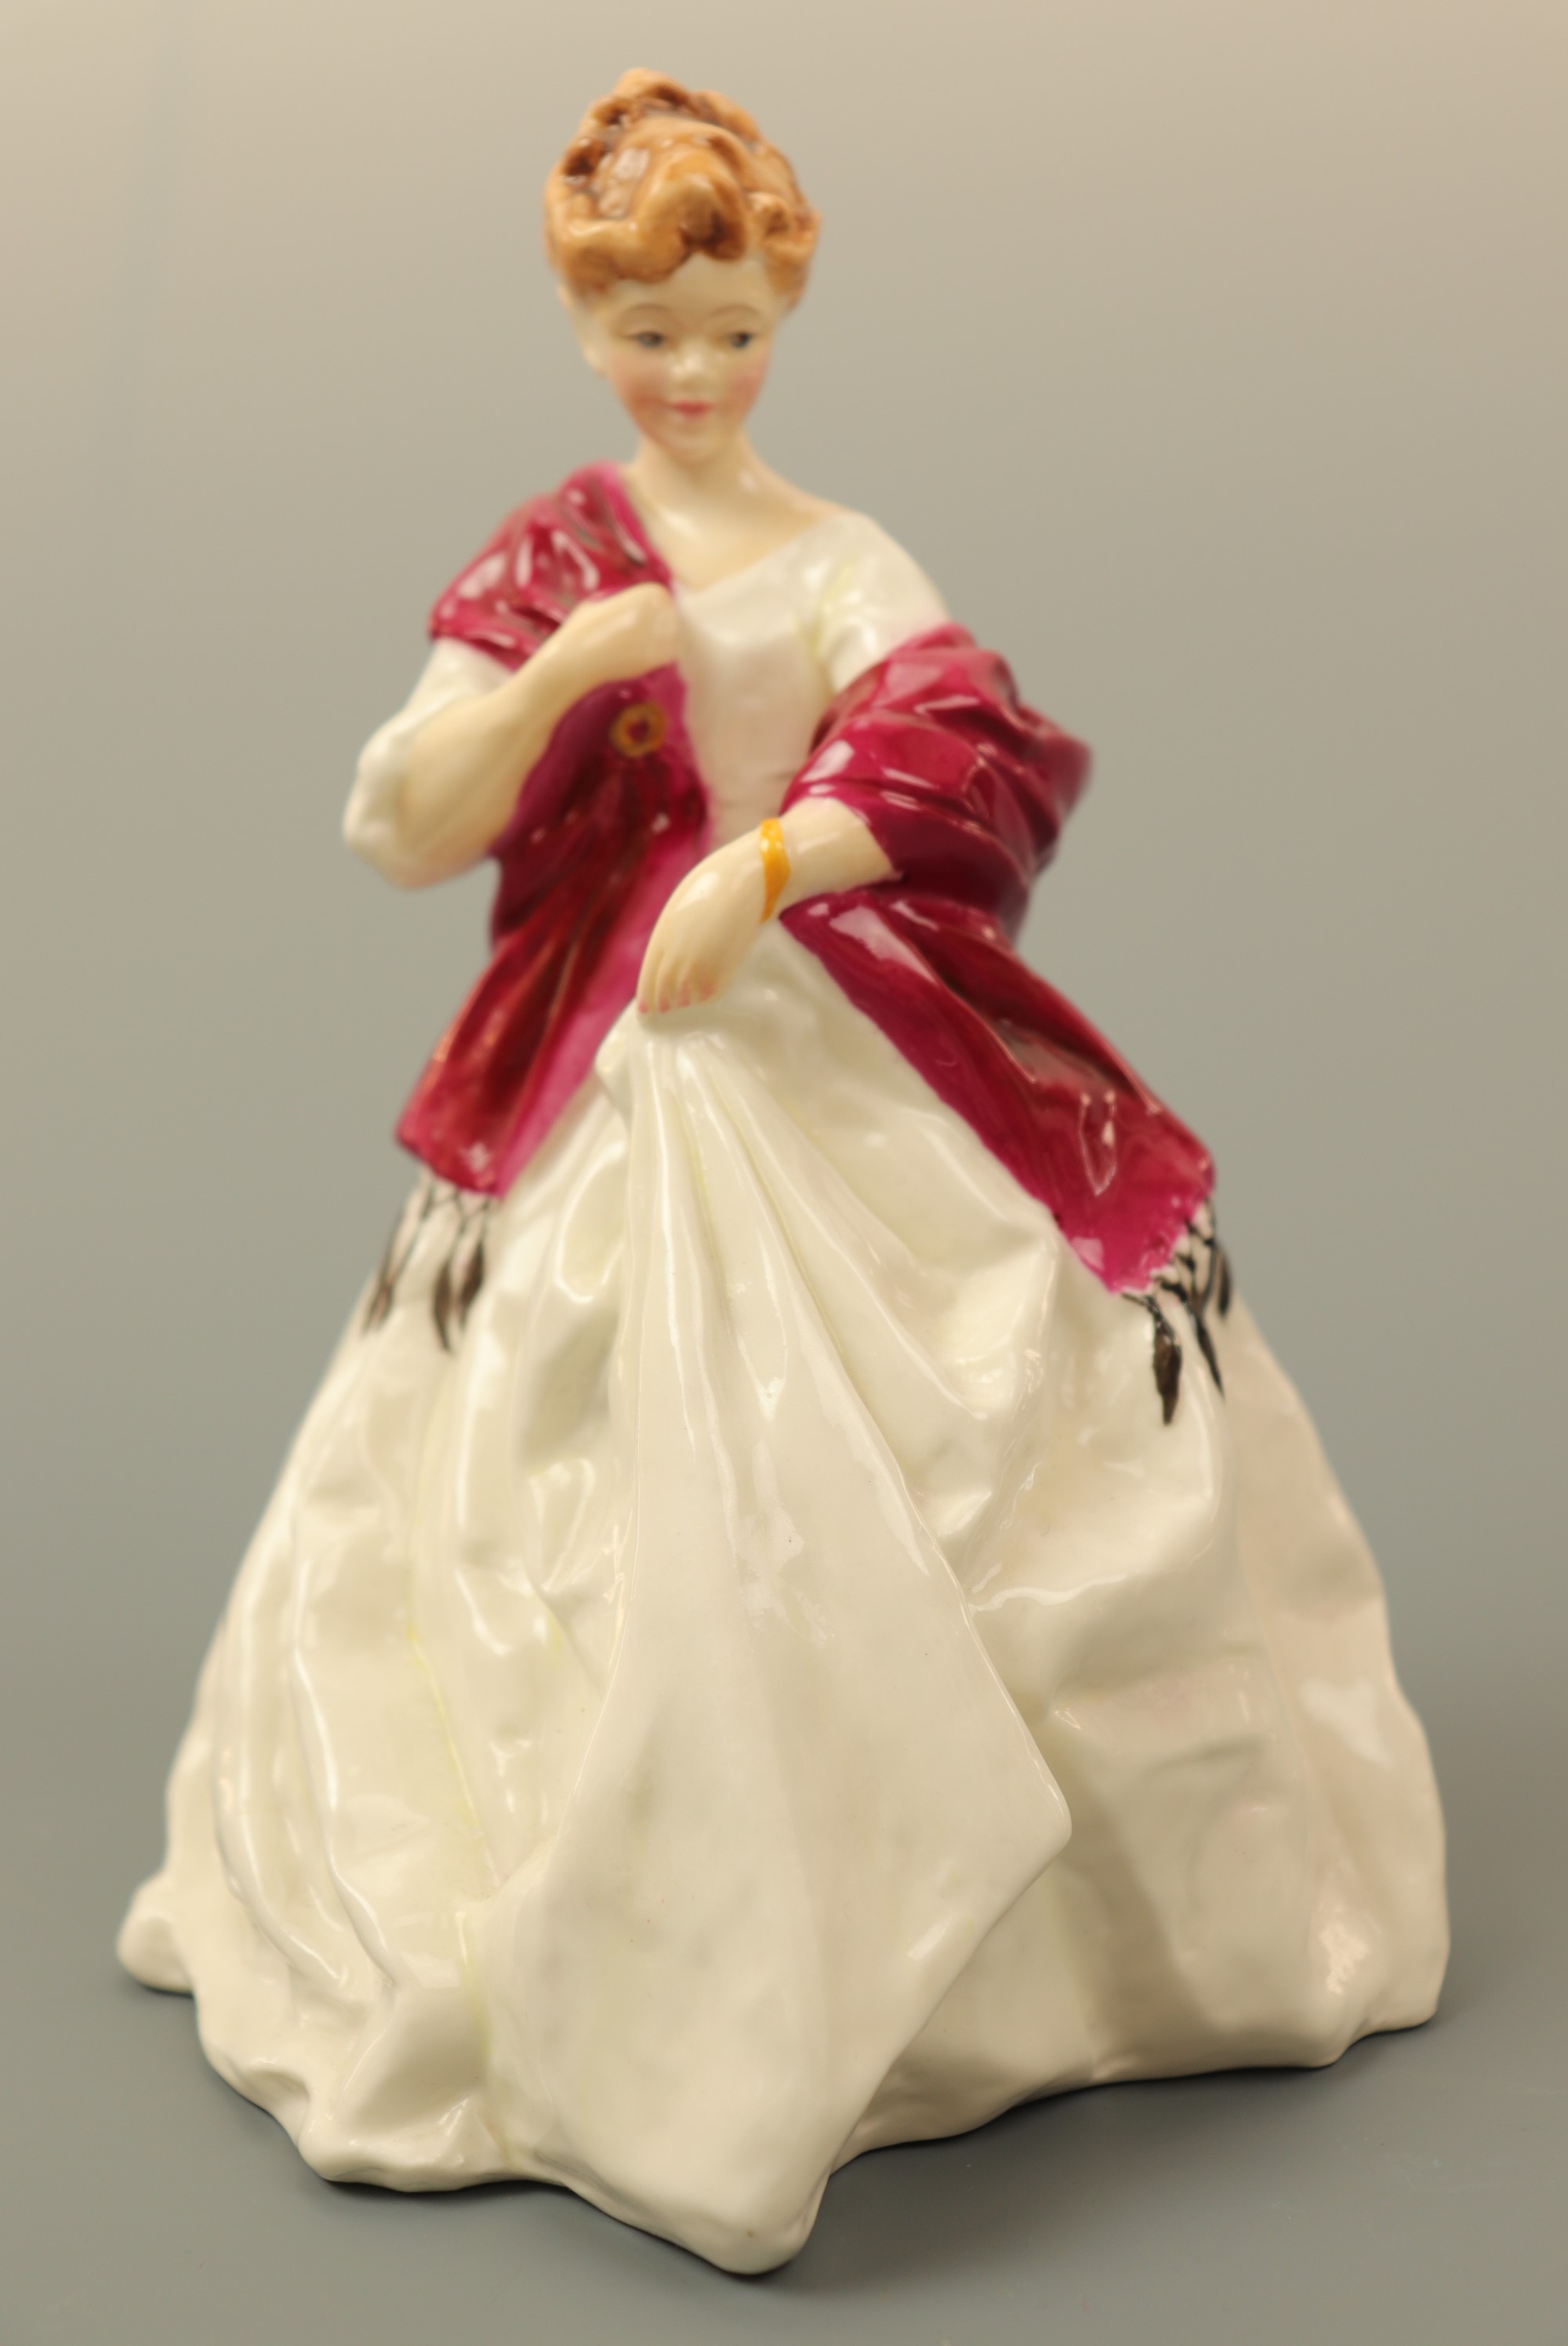 A Royal Worcester Figurine "The First Dance" modelled by FC Doughty 3629, 18 cm high